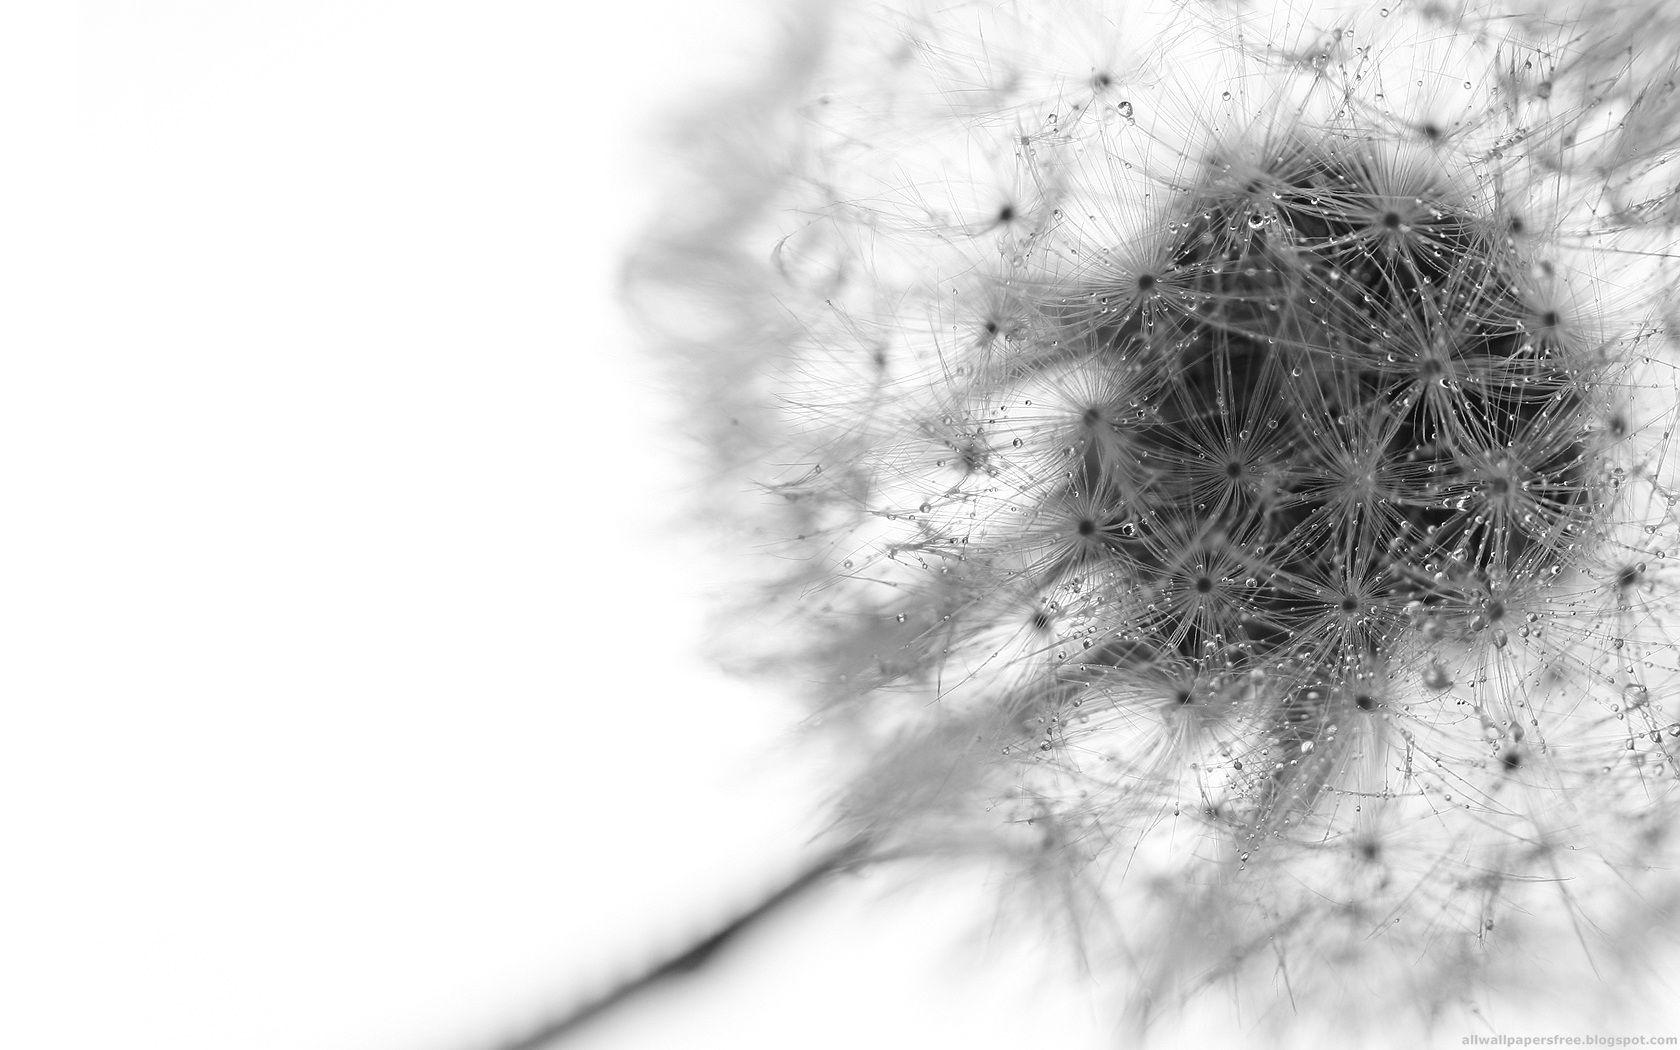  Black and White Dandelion Google Wallpapers Black and White Dandelion 1680x1050